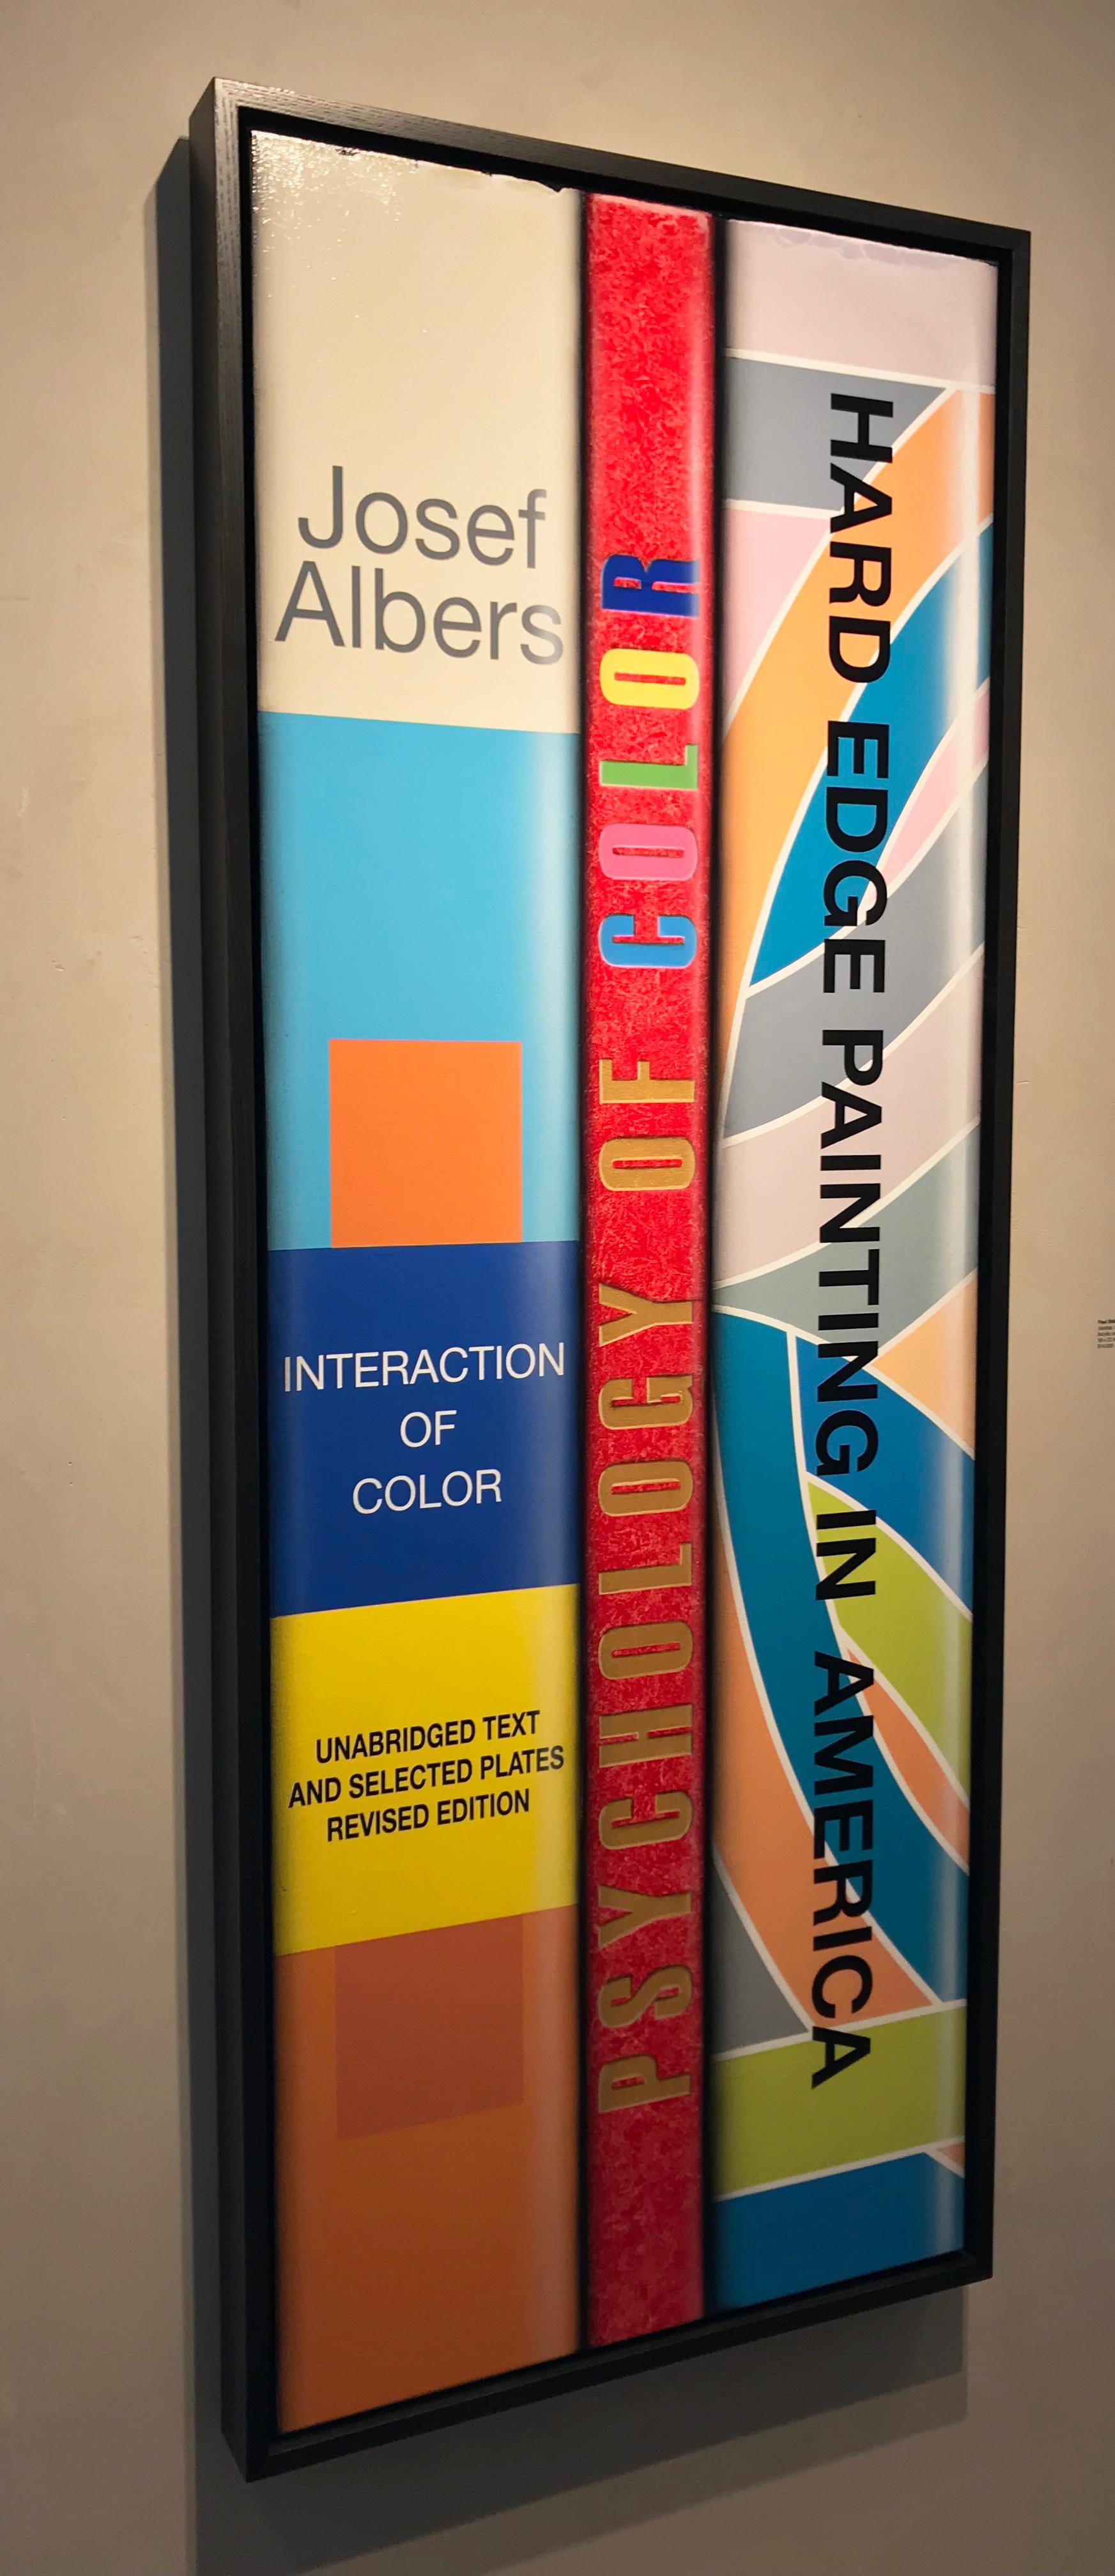 This hyper-realist acrylic painting of art book spines  Paul Béliveau depicts colorful spines of books demonstrates Béliveau's geometric sensibilities. This painting has a black wooden float frame and is signed verso. 
Paul Béliveau’s precisely